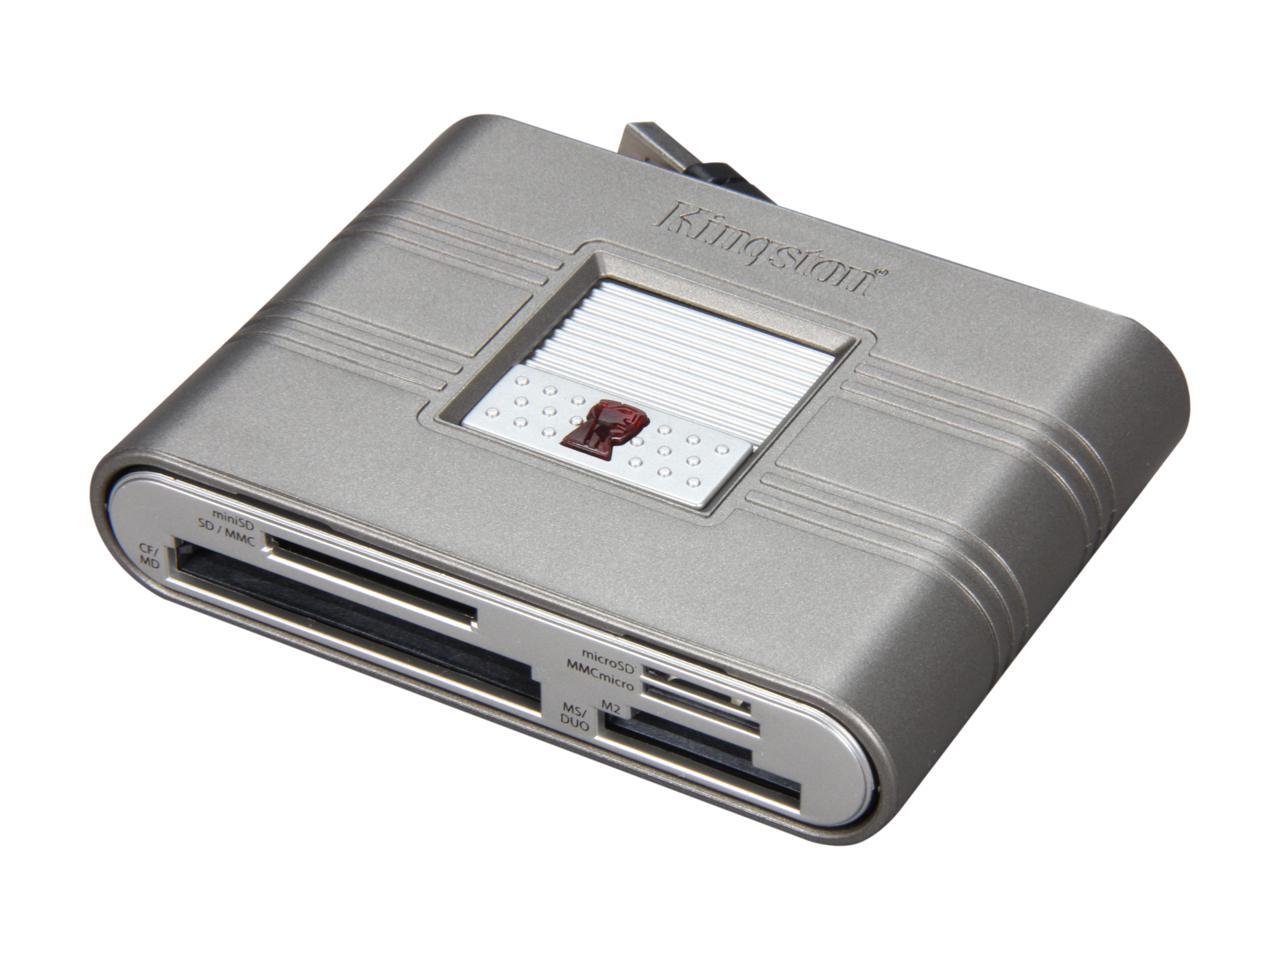 Картридер Kingston FCR hs219 1. HS-219. USB 2.0 Card Reader 19-in-1. USB Card Reader 19-in-1.